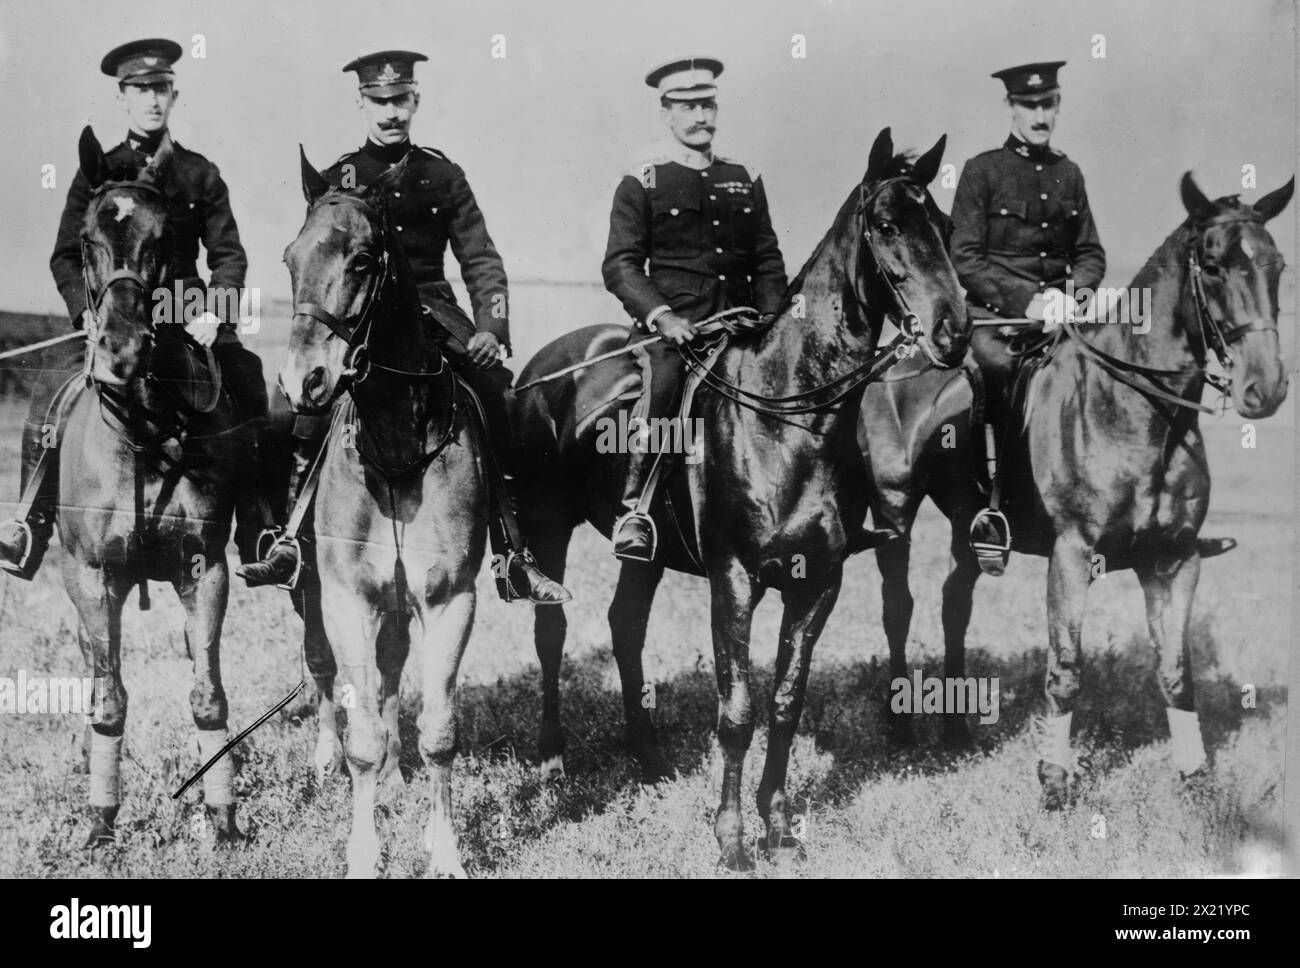 Lt. Walter Brooke; Lt. C.T. Walwyn; Col. P.A. Kenna &amp; Lt. Geoffrey Brooke, (1910?). Shows British officers who participated in a November 1910 National Horse Show Association event in Madison Square Garden, New York City. Stock Photo